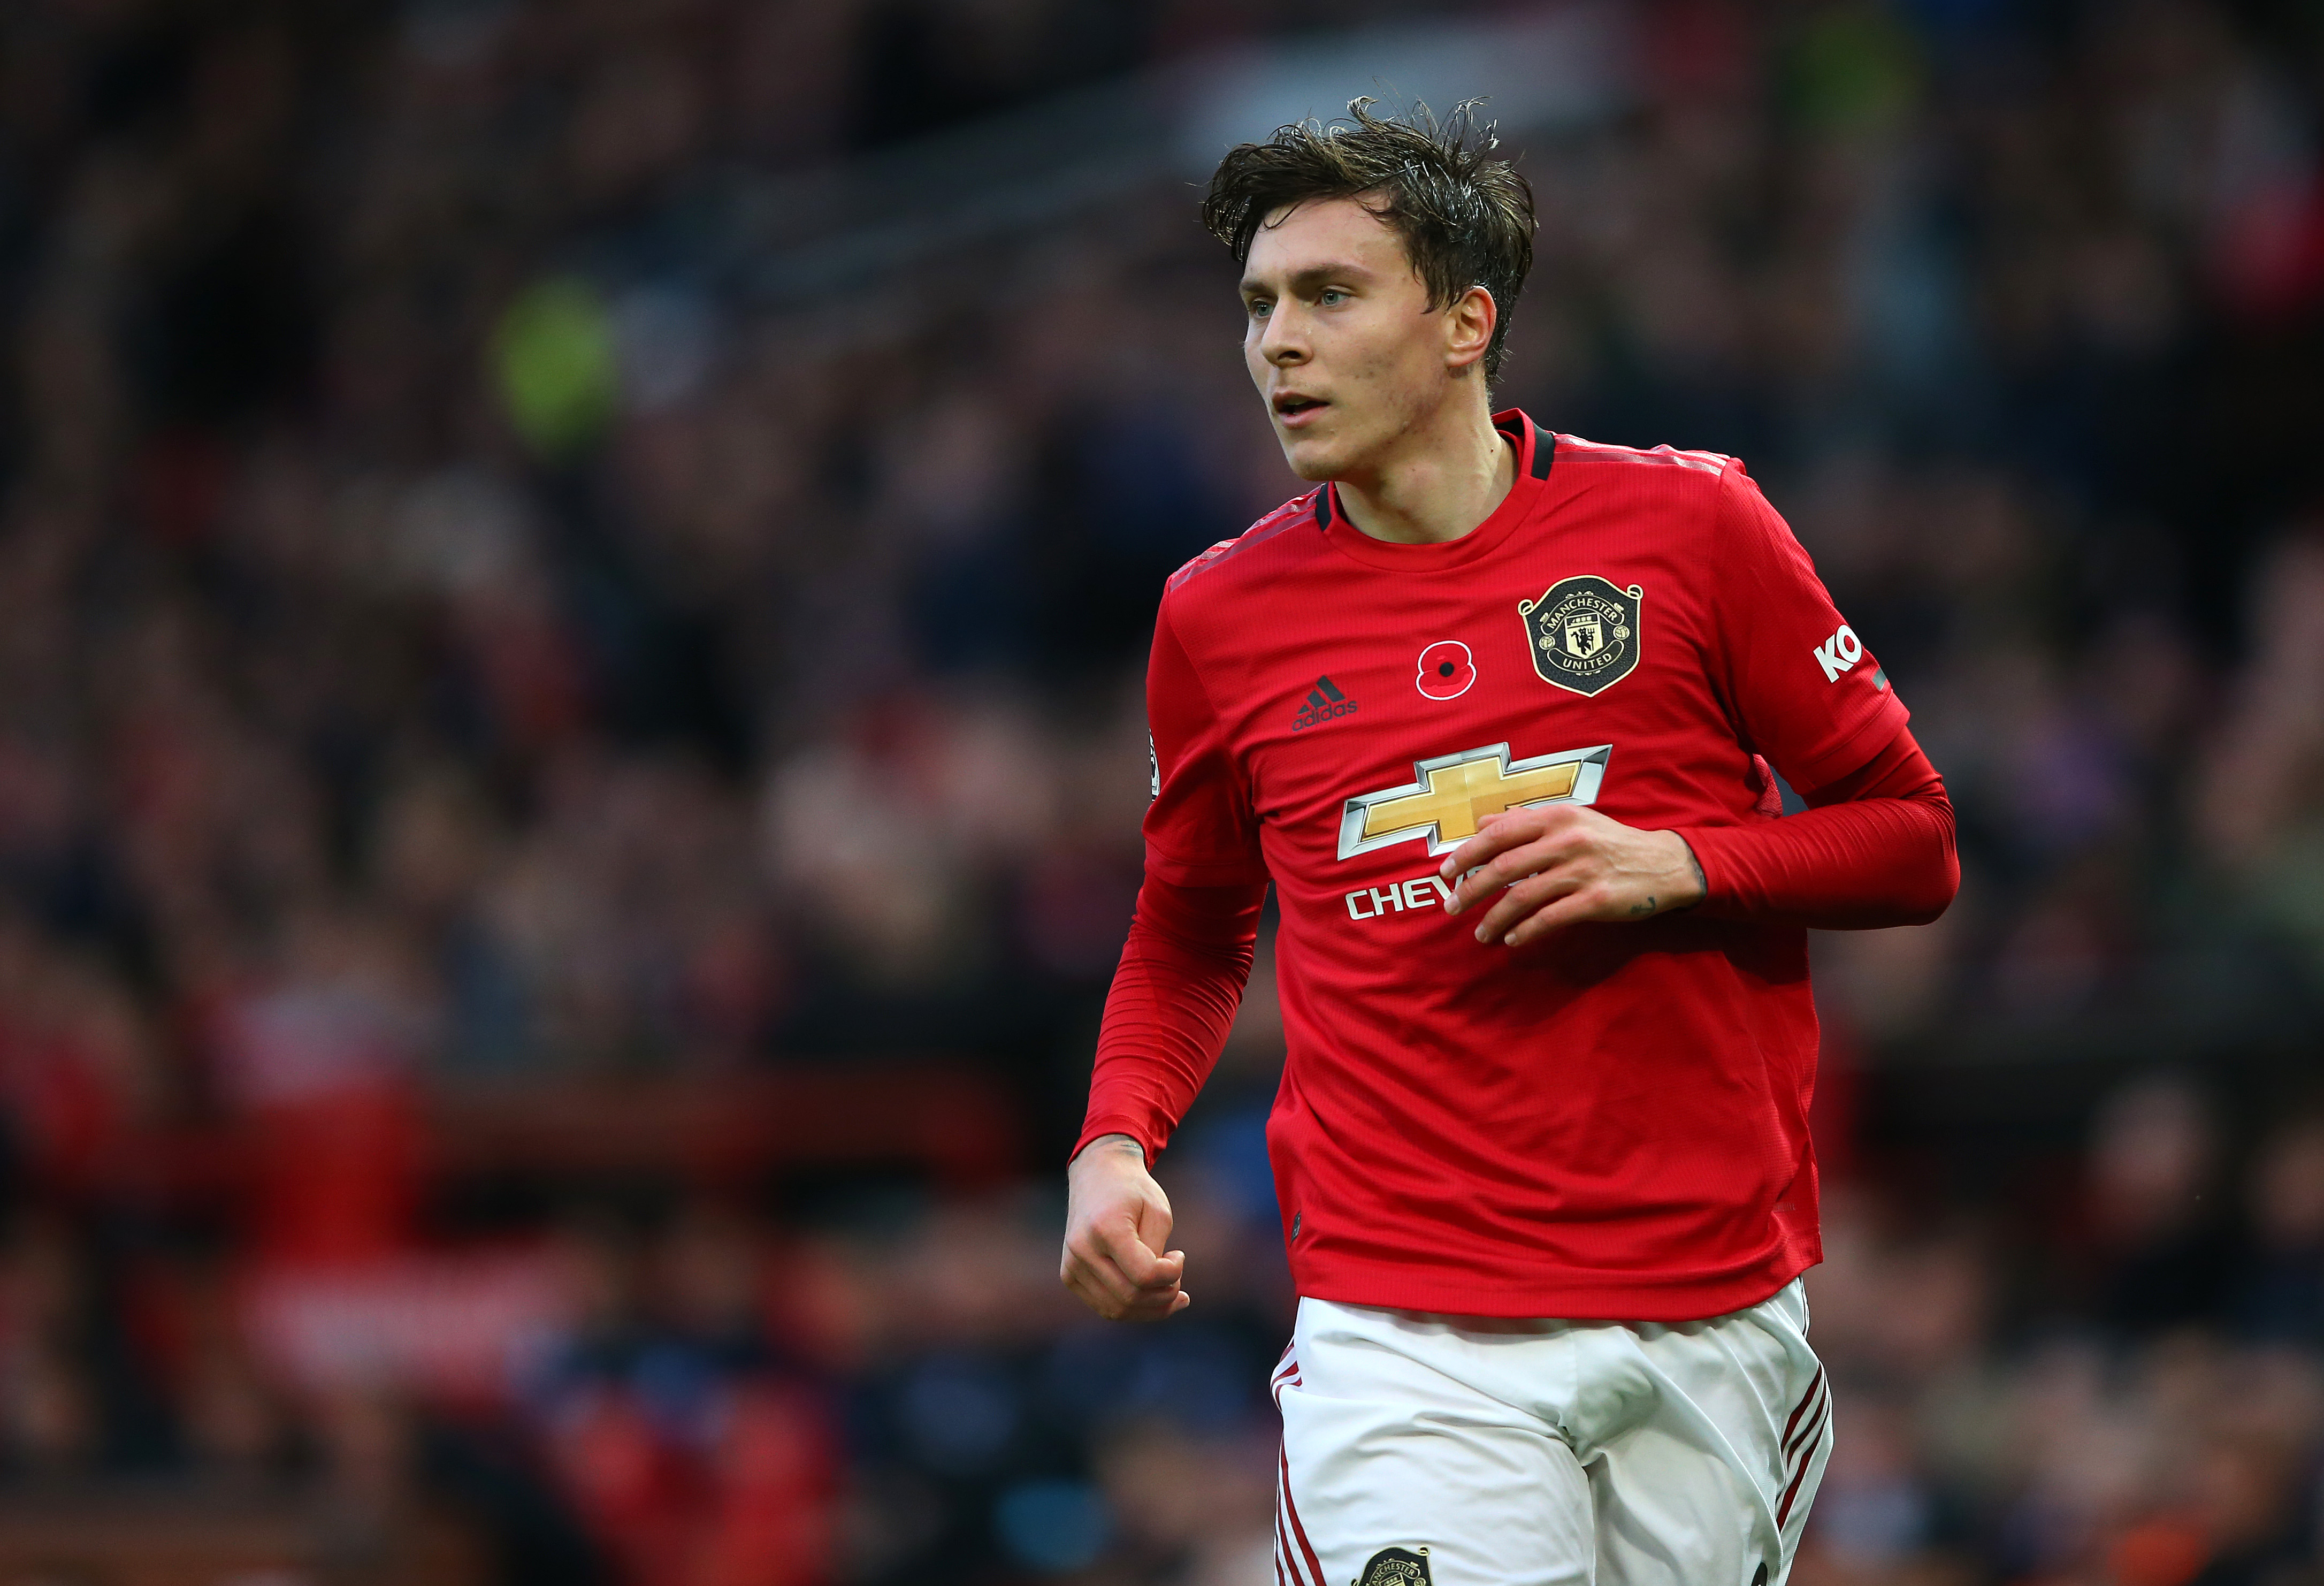 AS Roma are interested in Manchester United star Victor Lindelof who has failed to hold onto his starting position at Old Trafford this season